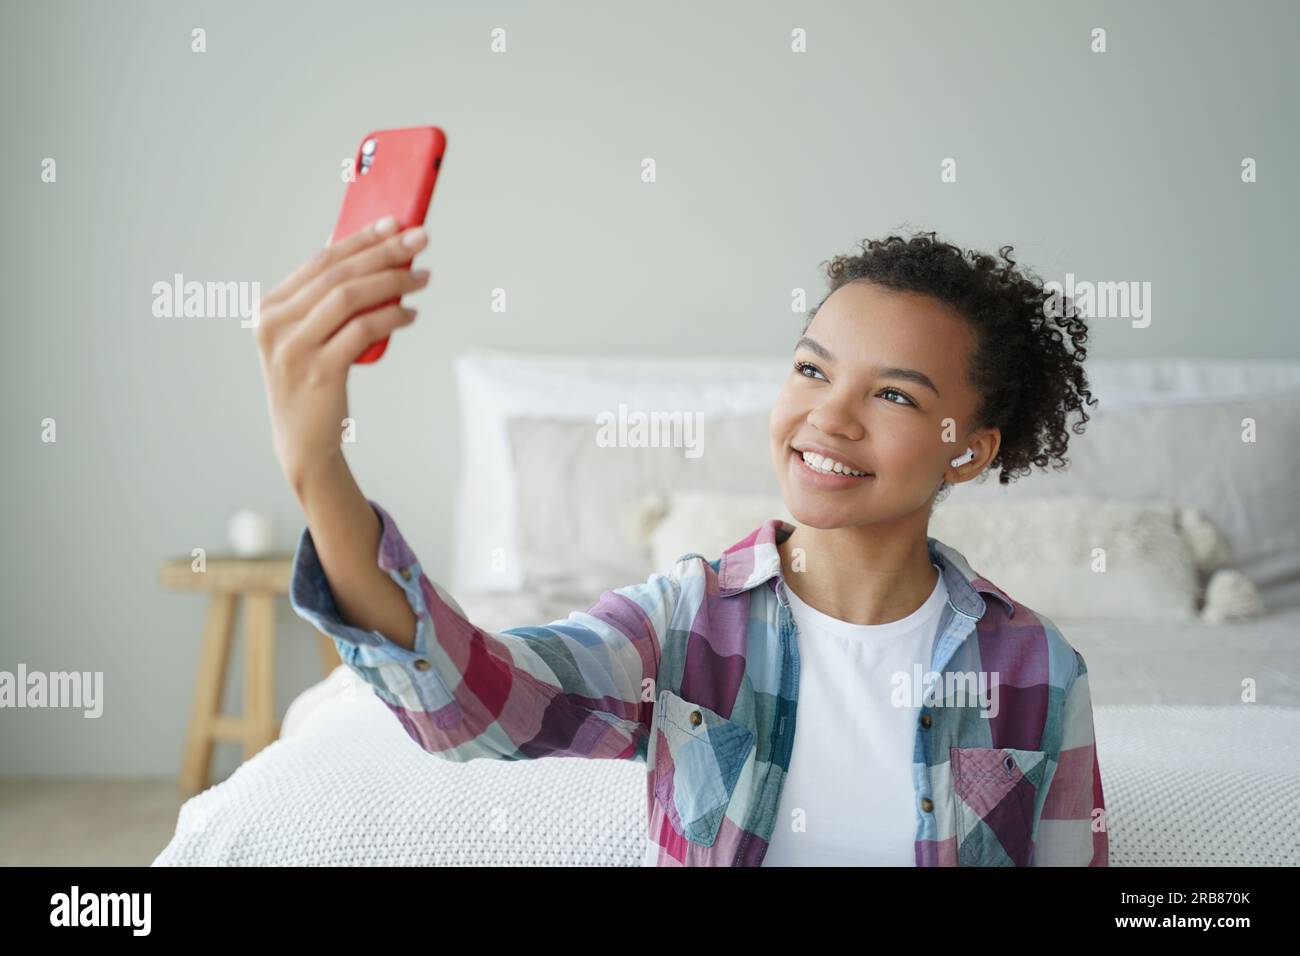 Biracial teen blogger chats online via phone video call, uses modern apps at home. Smiling girl takes selfie with smartphone. Stock Photo